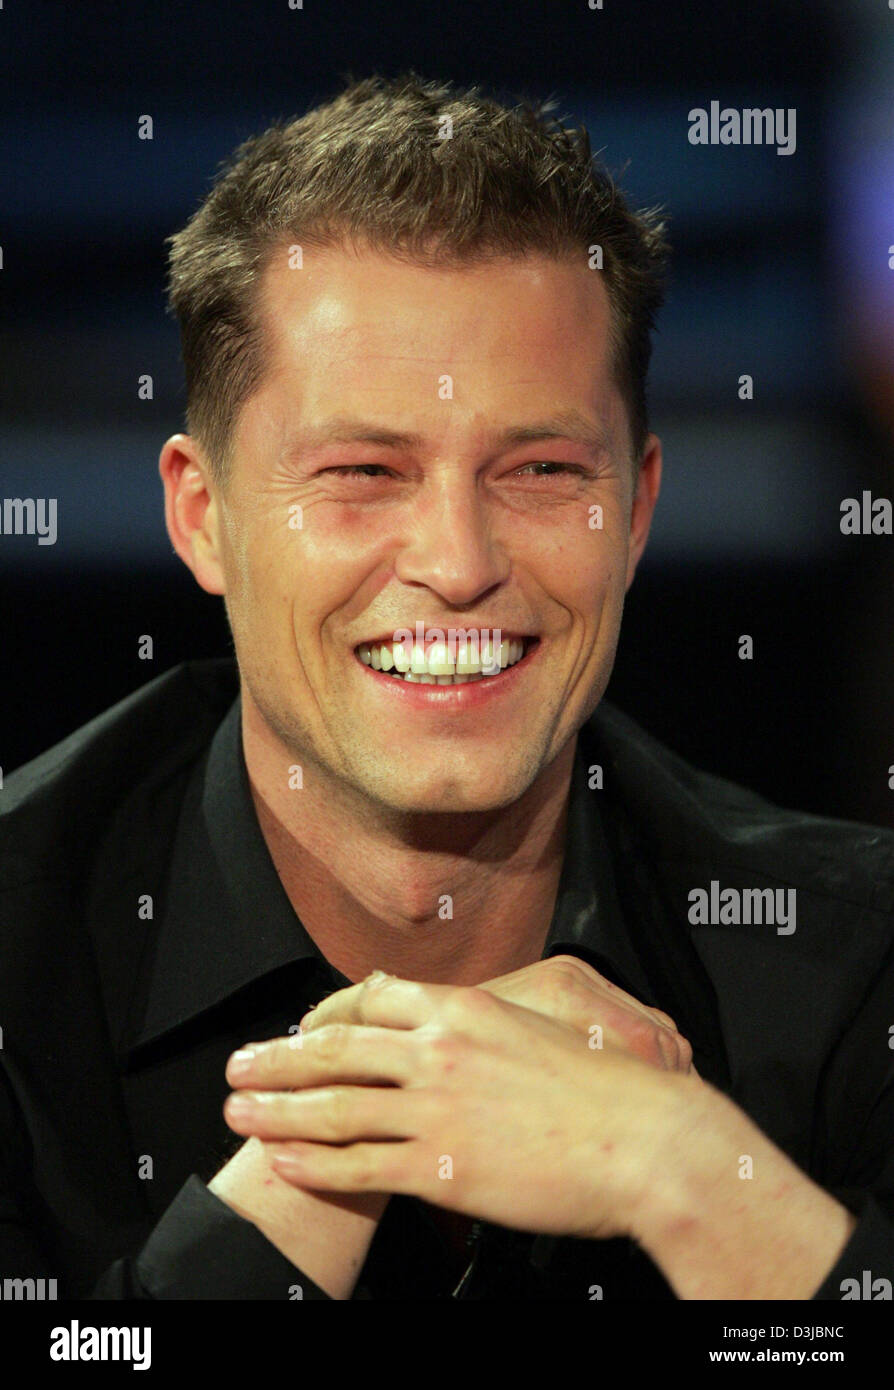 (dpa) - German actor and producer Til Schweiger smiles during a show on German television in Cologne, Germany, 7 March 2005. Stock Photo